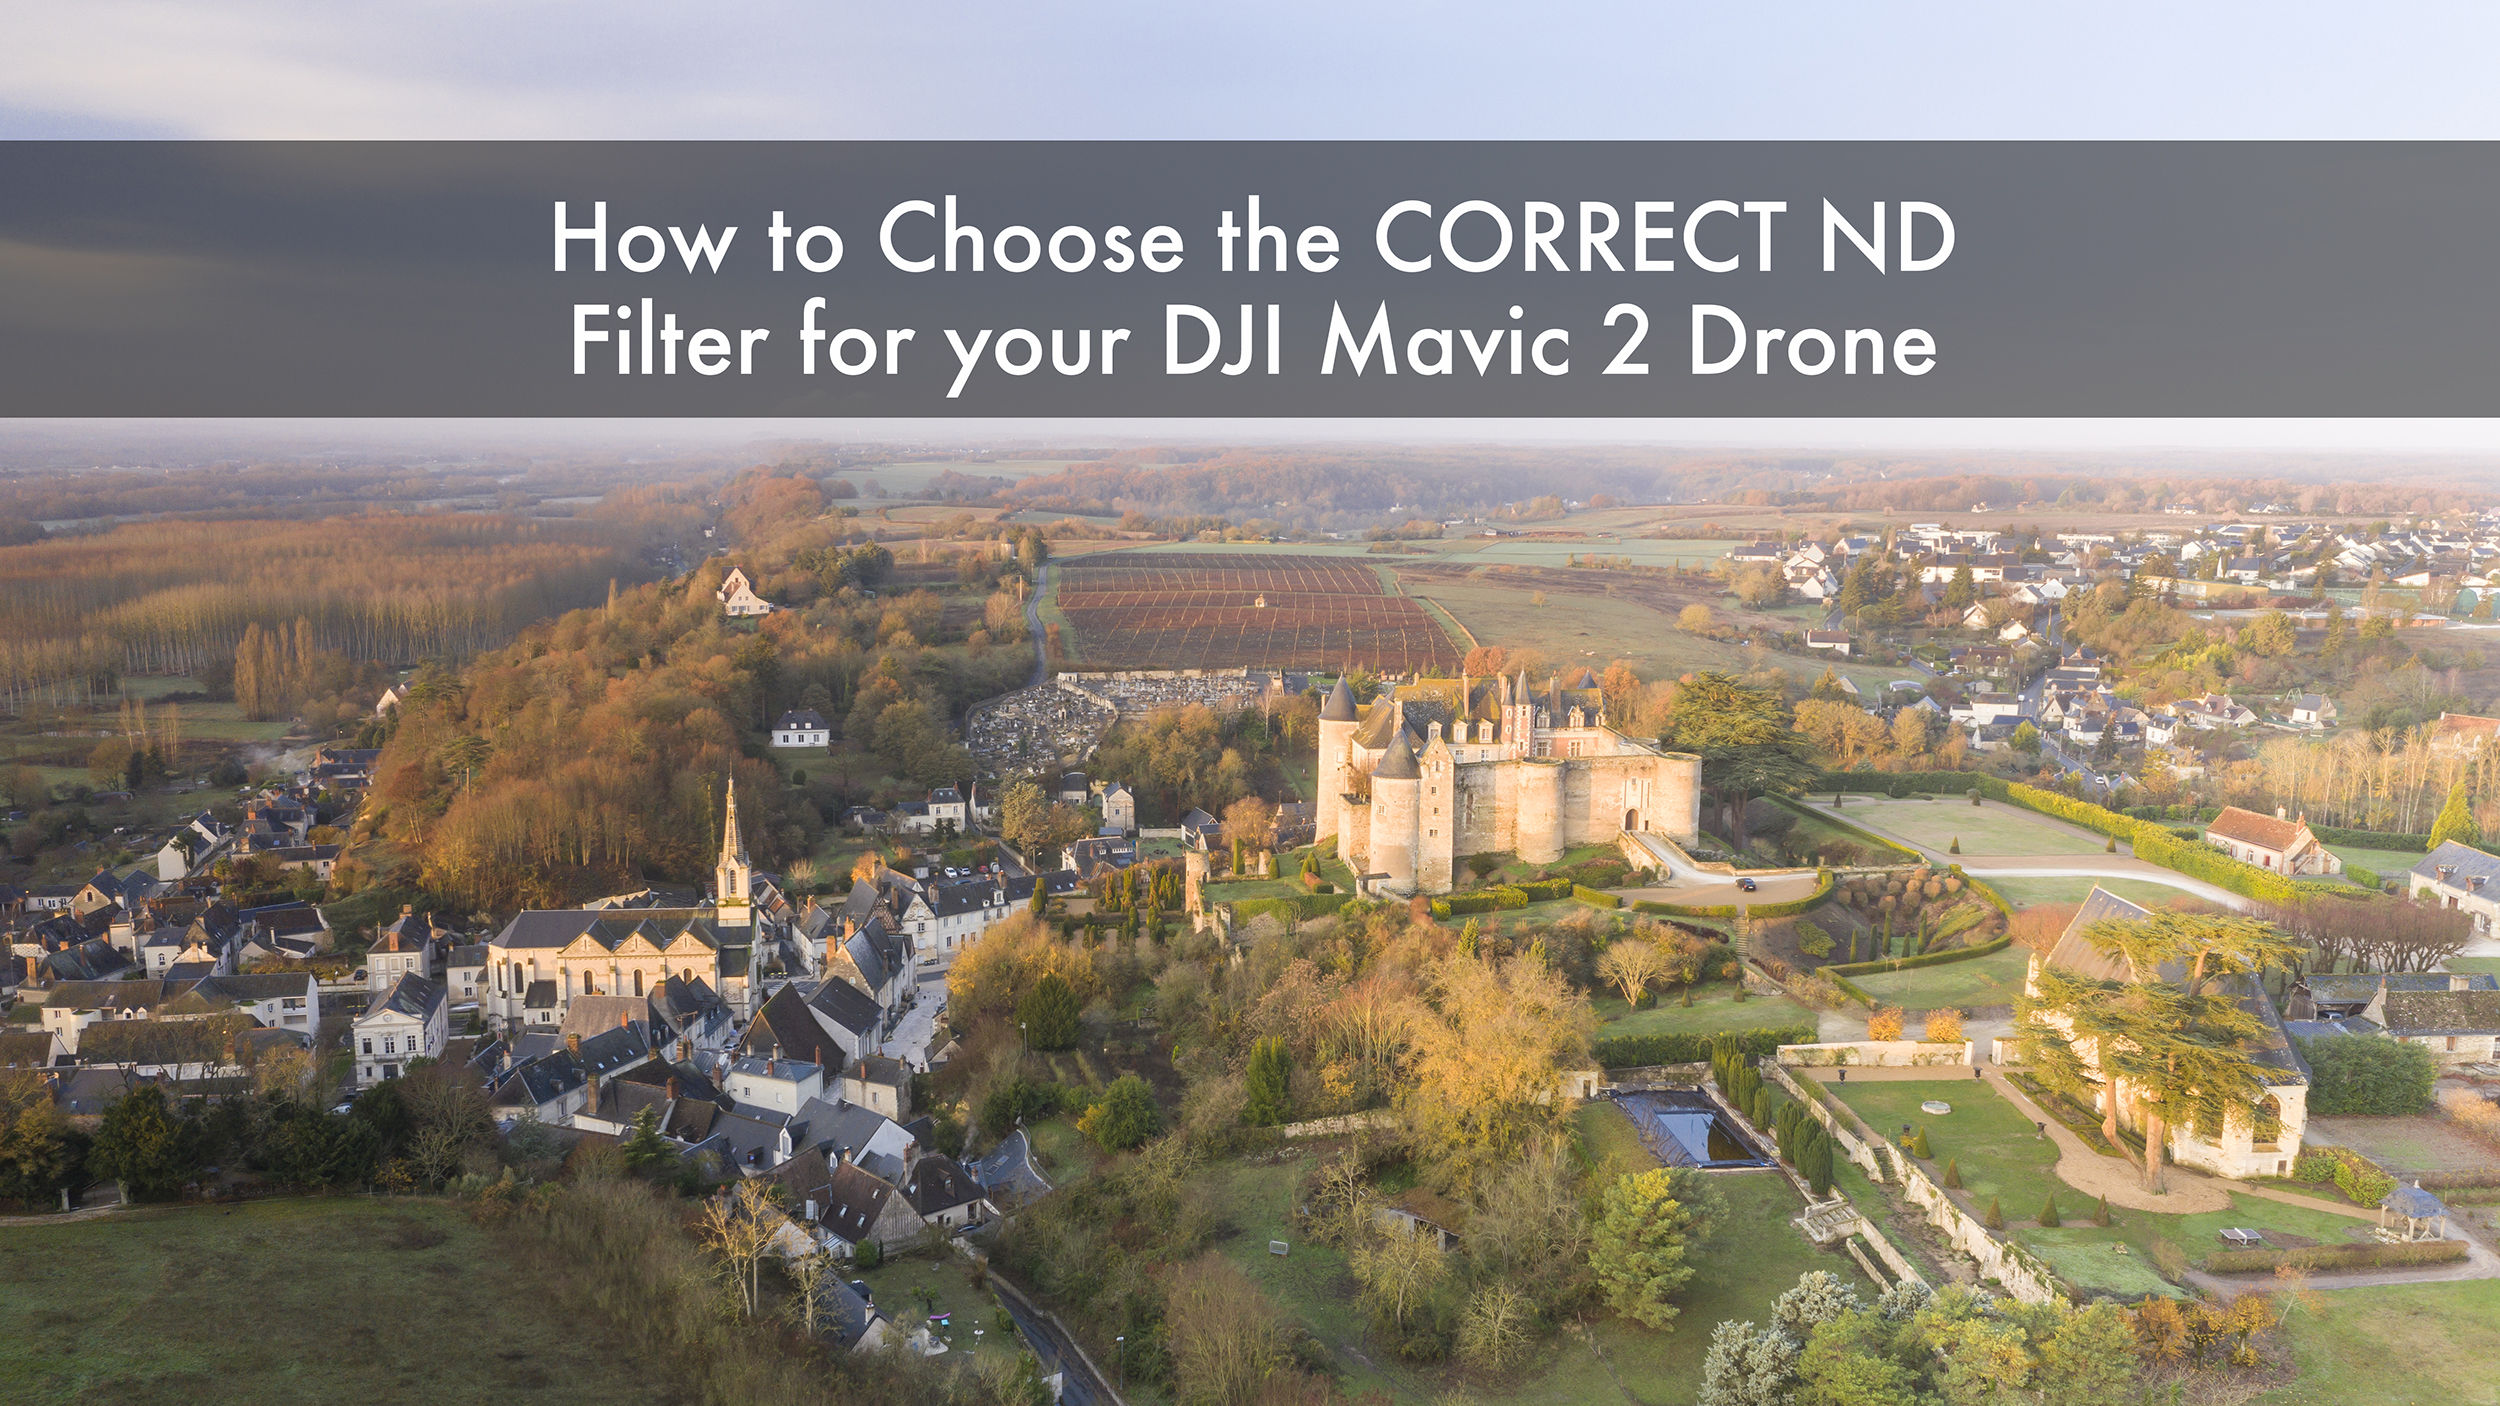 How to choose the correct ND filter for your drone